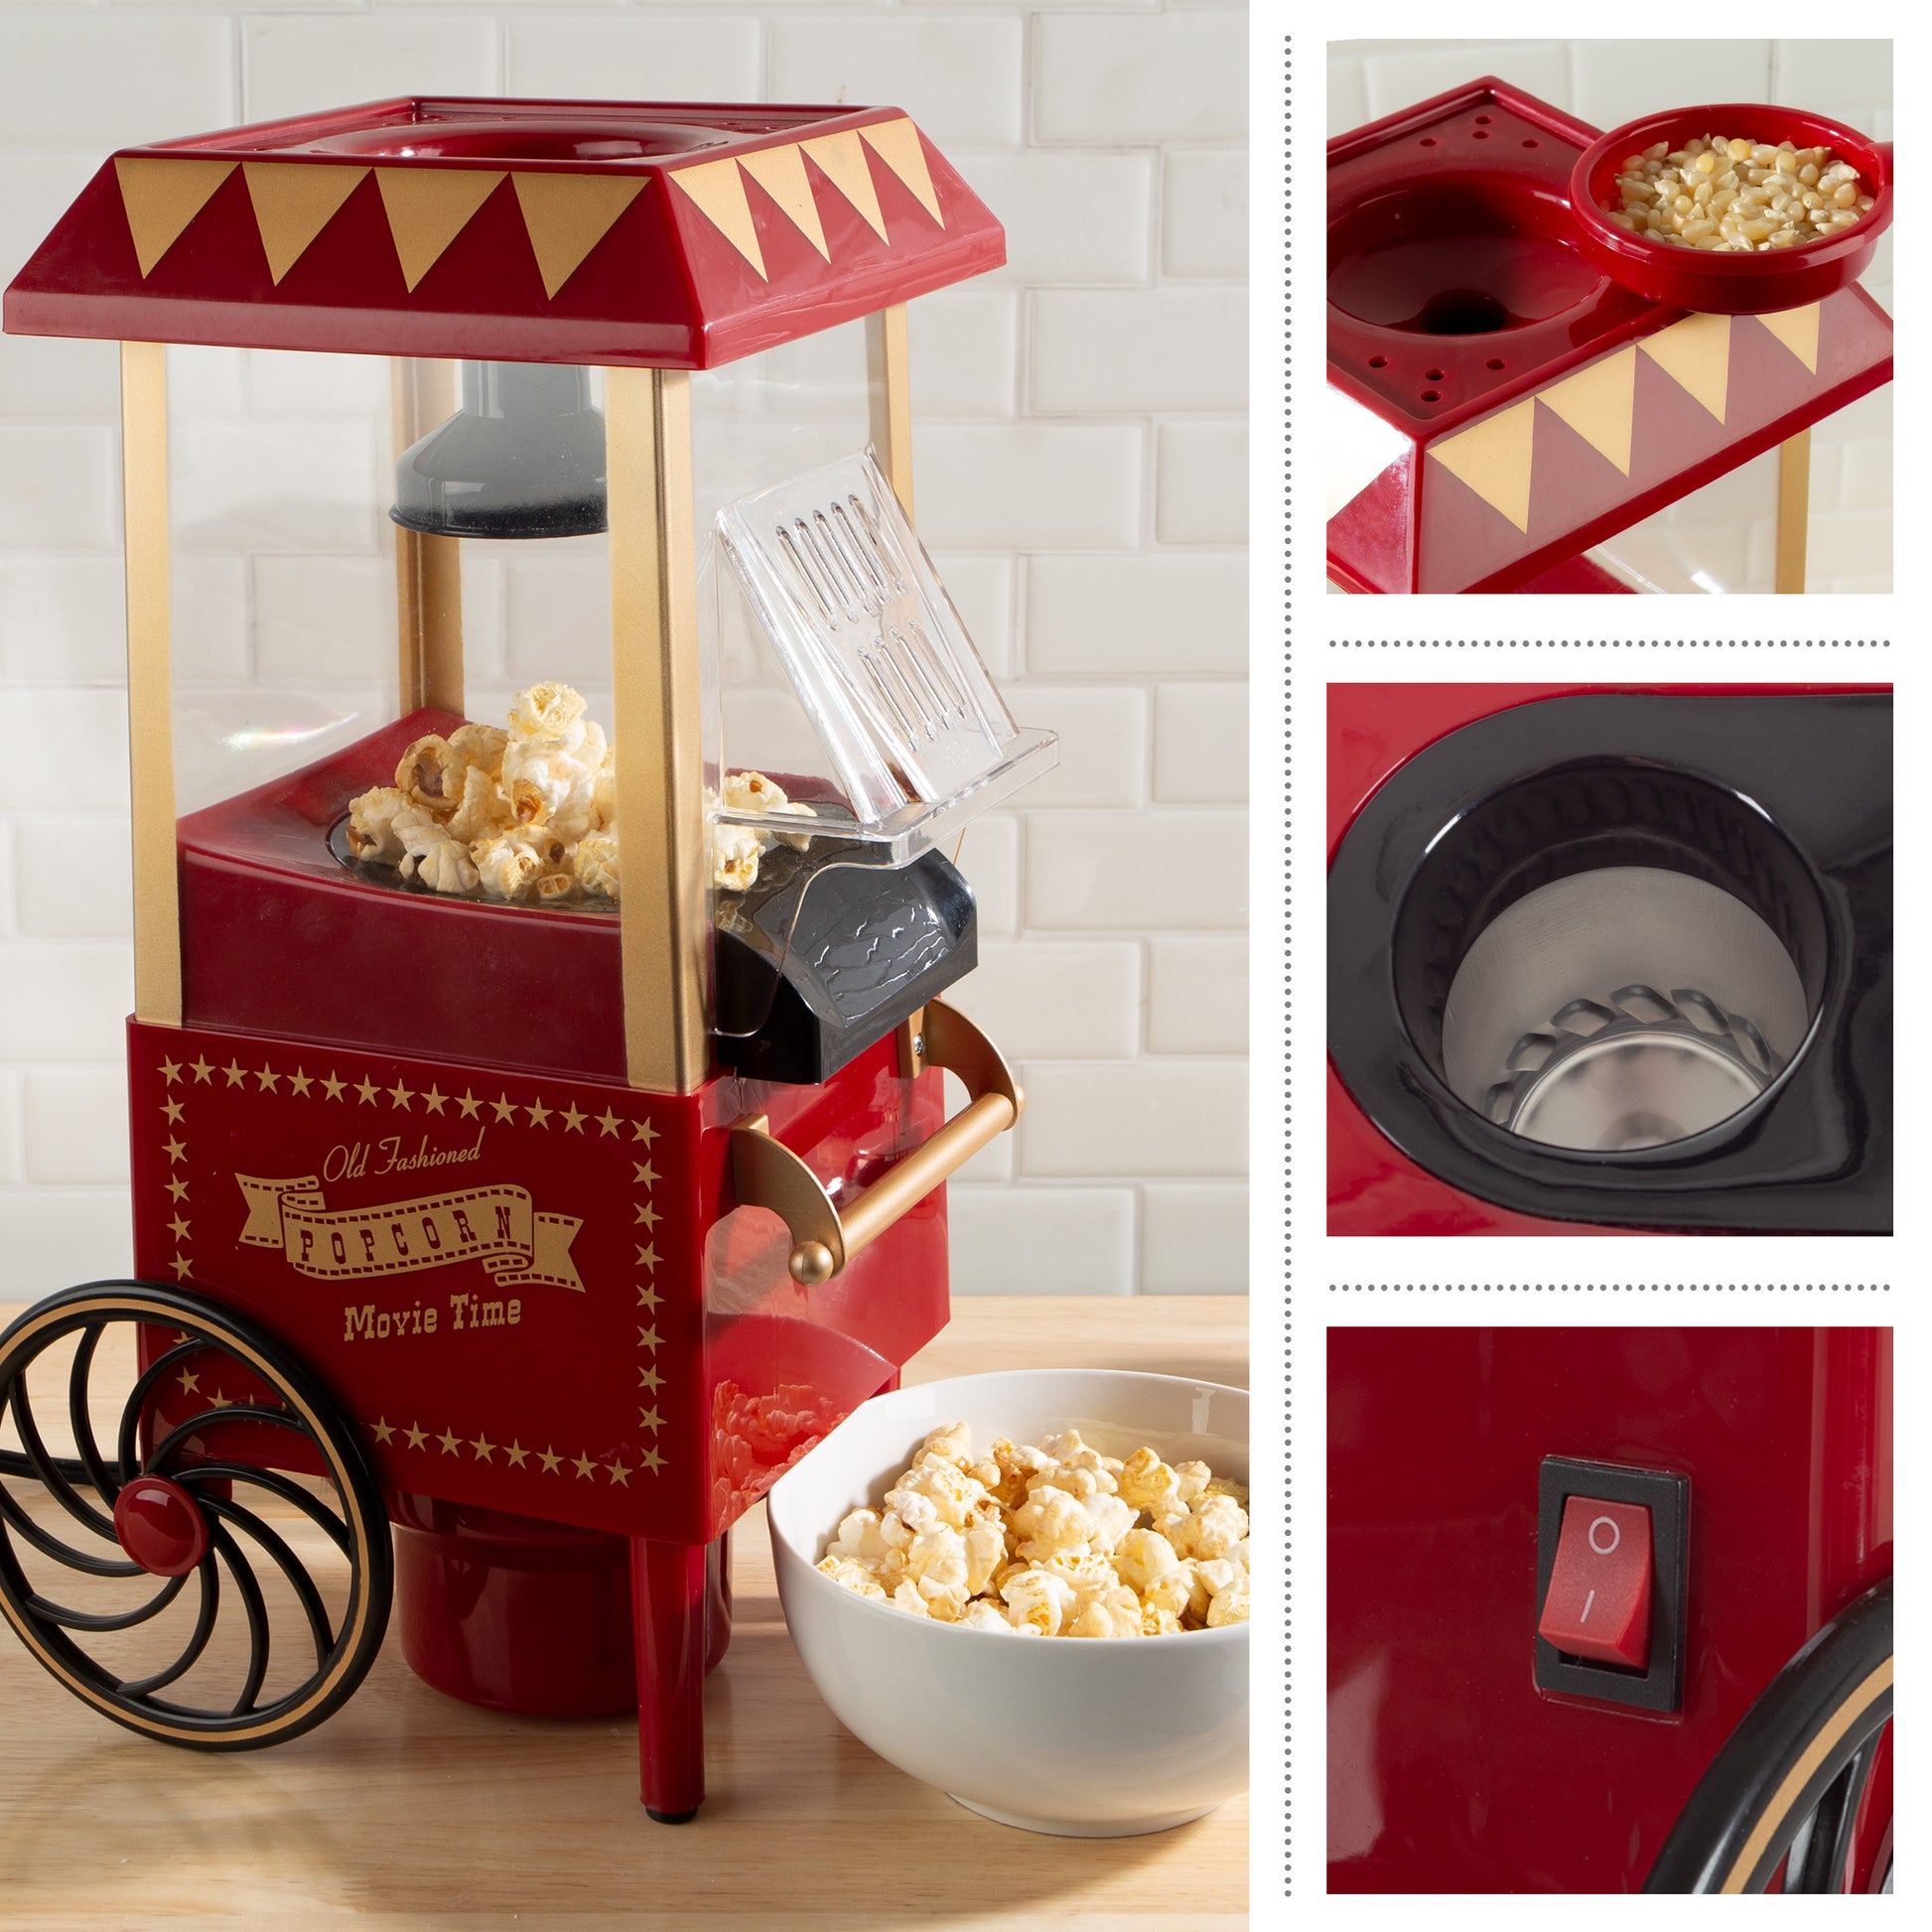 Great Northern Popcorn 2 Cups Oil Popcorn Machine, Red, Tabletop